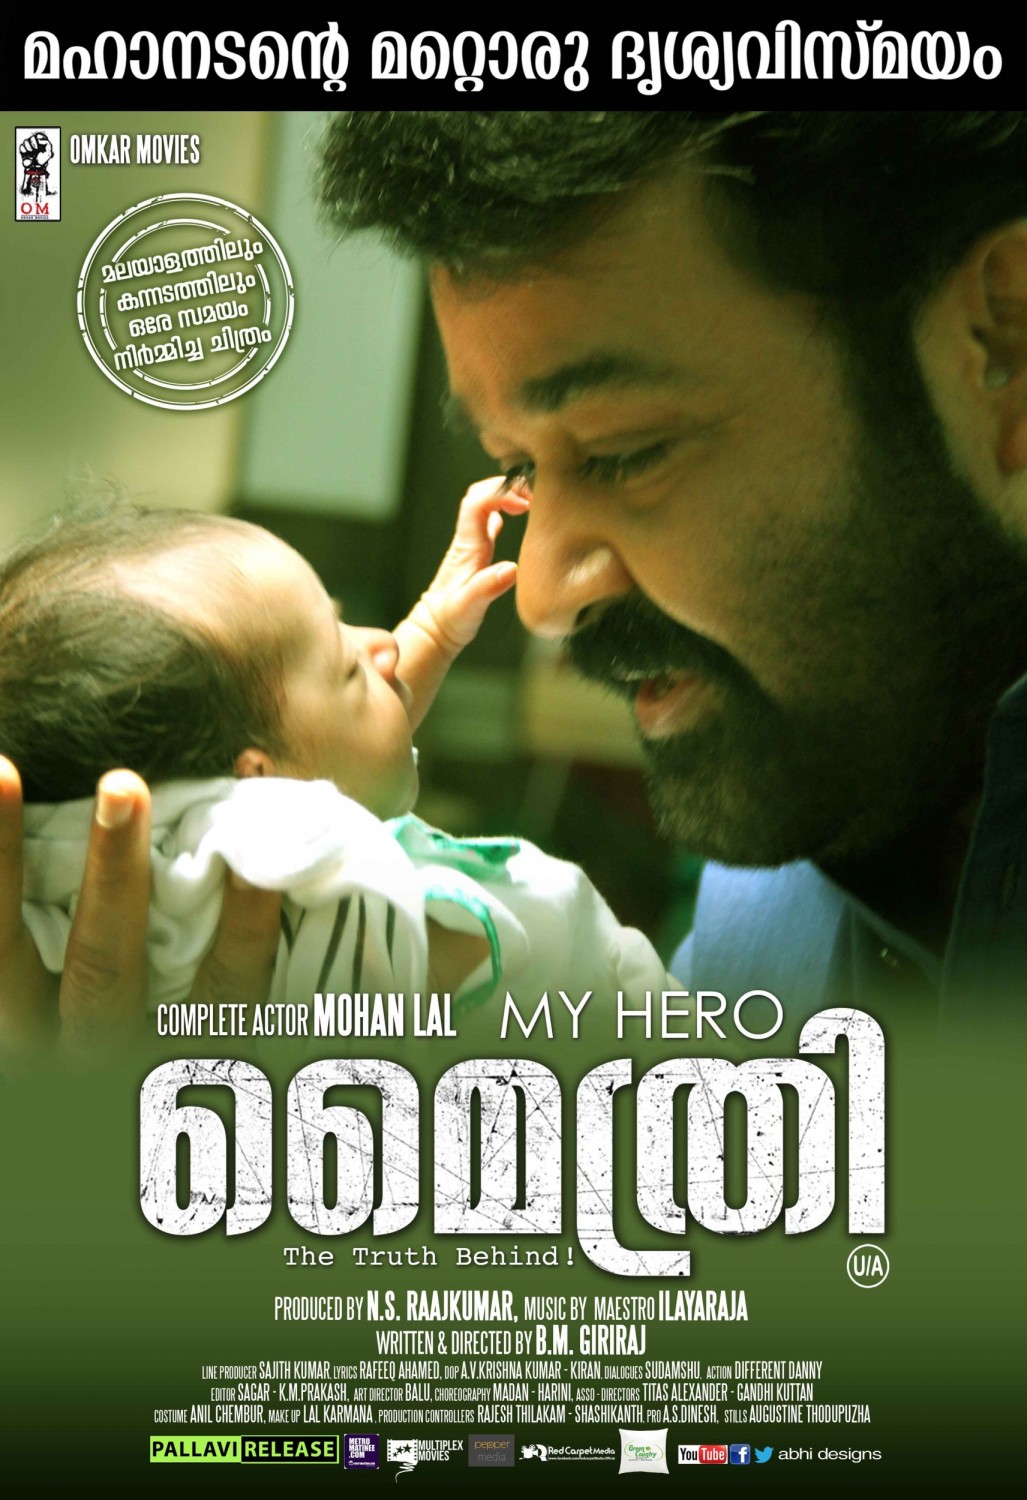 Extra Large Movie Poster Image for Mythri (#26 of 29)